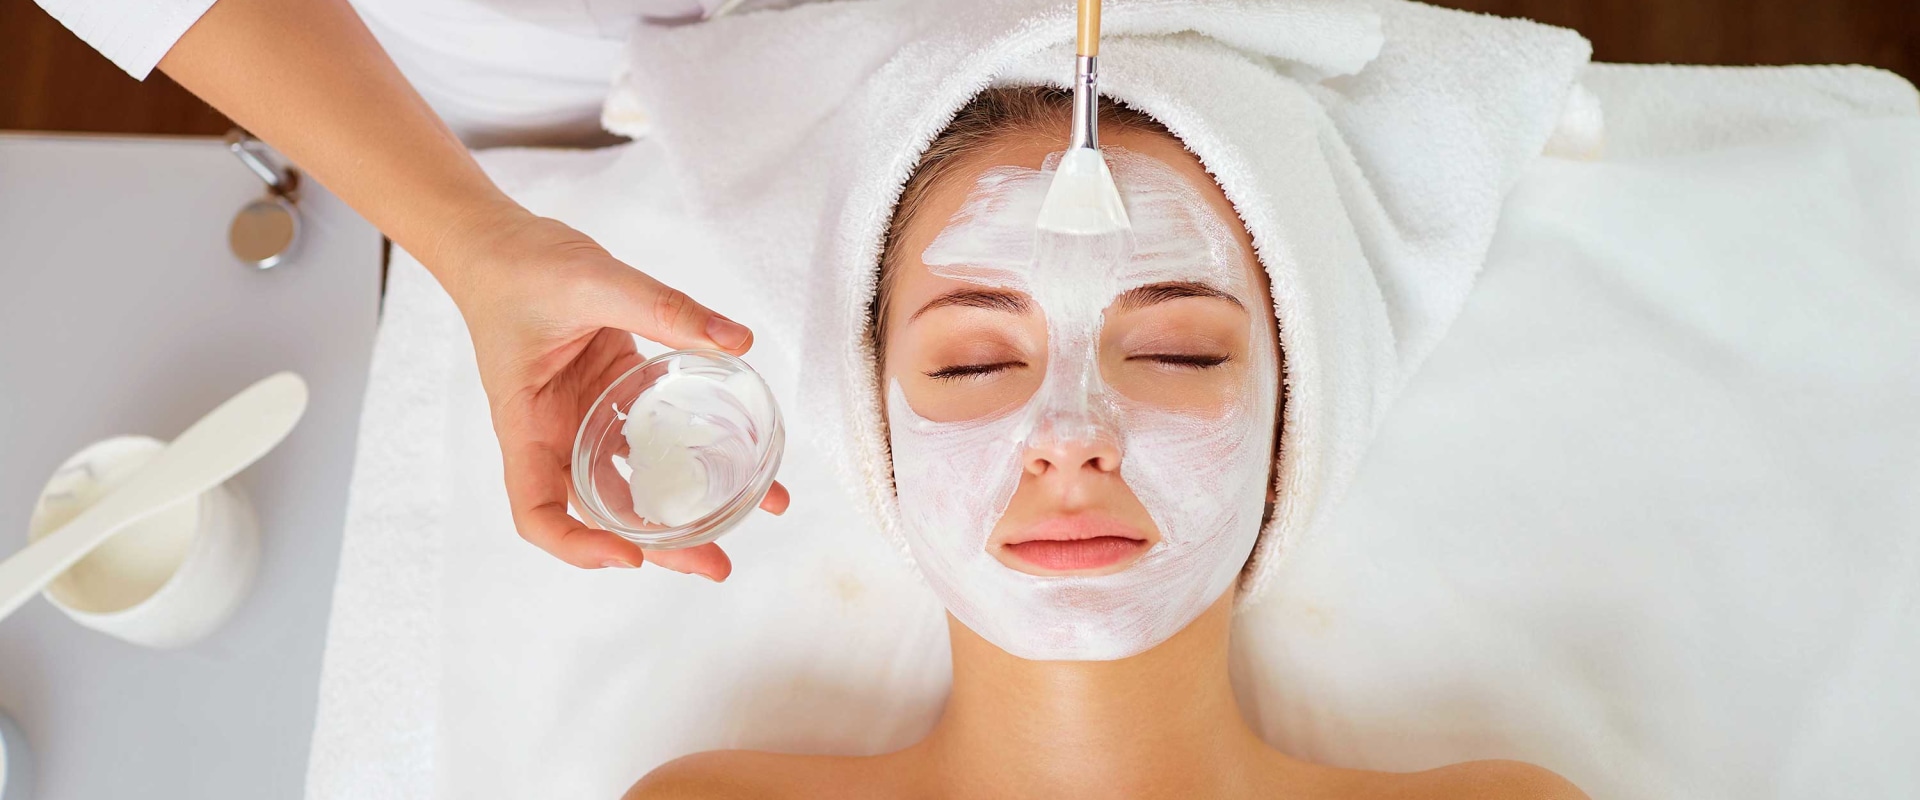 The Benefits of Beauty Treatments: Why People Get Them